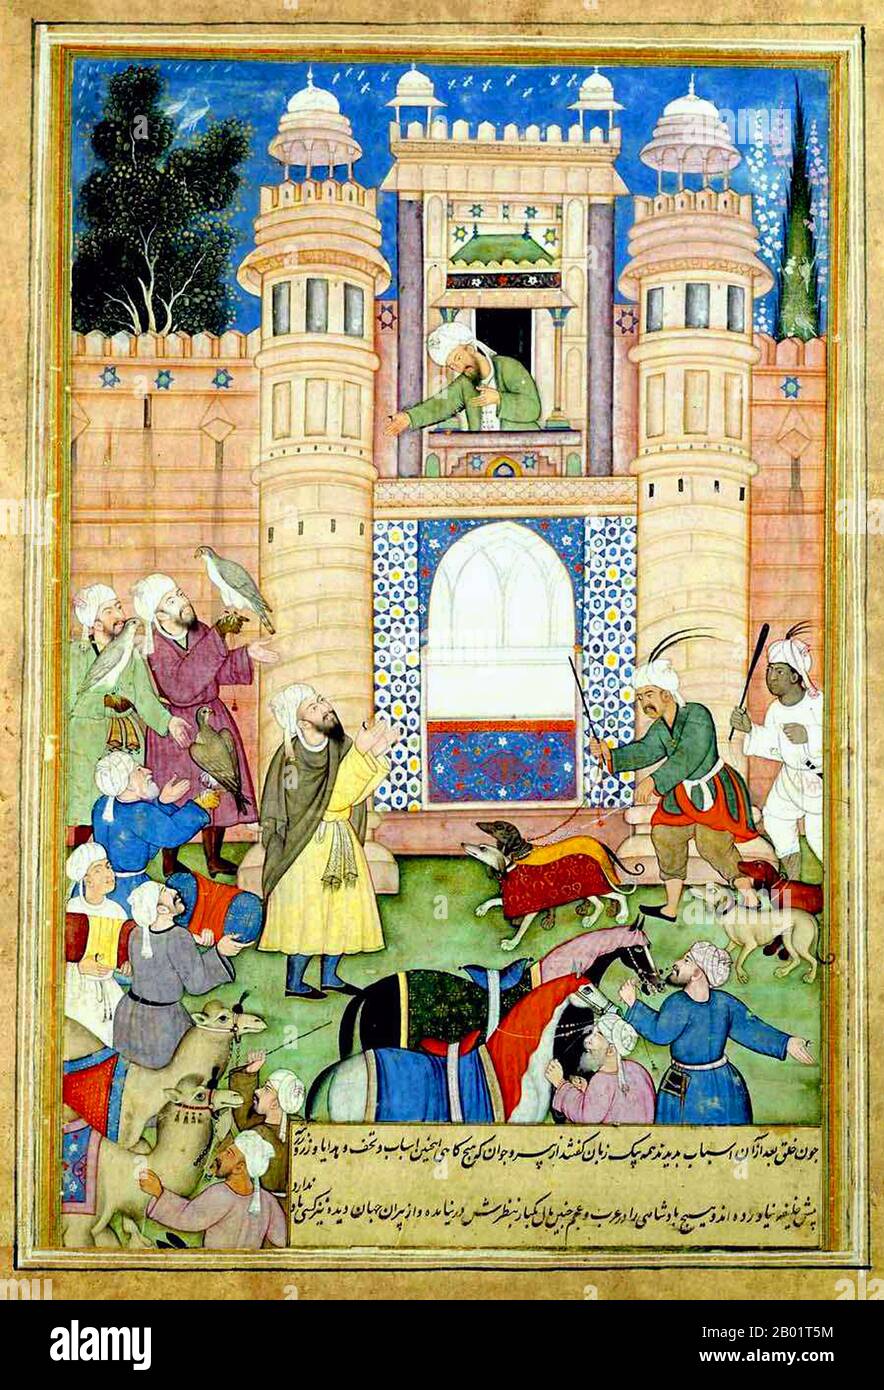 India: A nobleman offering gifts to the Caliph. Miniature painting from the Akbar i-Barmayakan, c. 1595-1600.  Mughal painting is a particular style of South Asian painting, generally confined to miniatures either as book illustrations or as single works to be kept in albums, which emerged from Persian miniature painting, with Indian Hindu, Jain and Buddhist influences, and developed largely in the court of the Mughal Empire (16th-19th centuries), and later spread to other Indian courts, both Muslim and Hindu, and later Sikh. Stock Photo